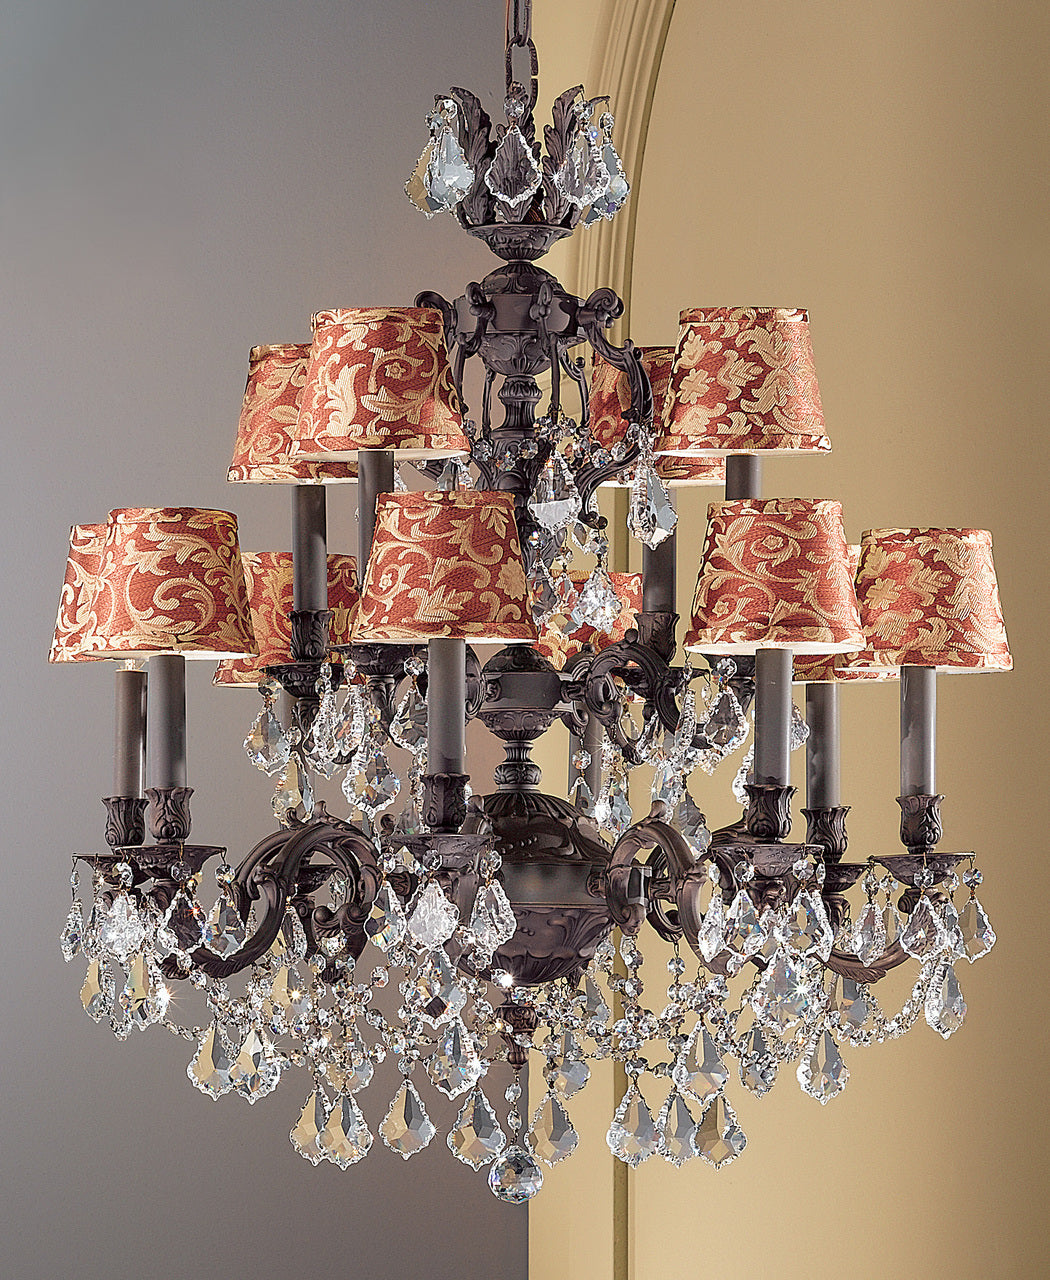 Classic Lighting 57389 FG S Chateau Imperial Crystal Chandelier in French Gold (Imported from Spain)